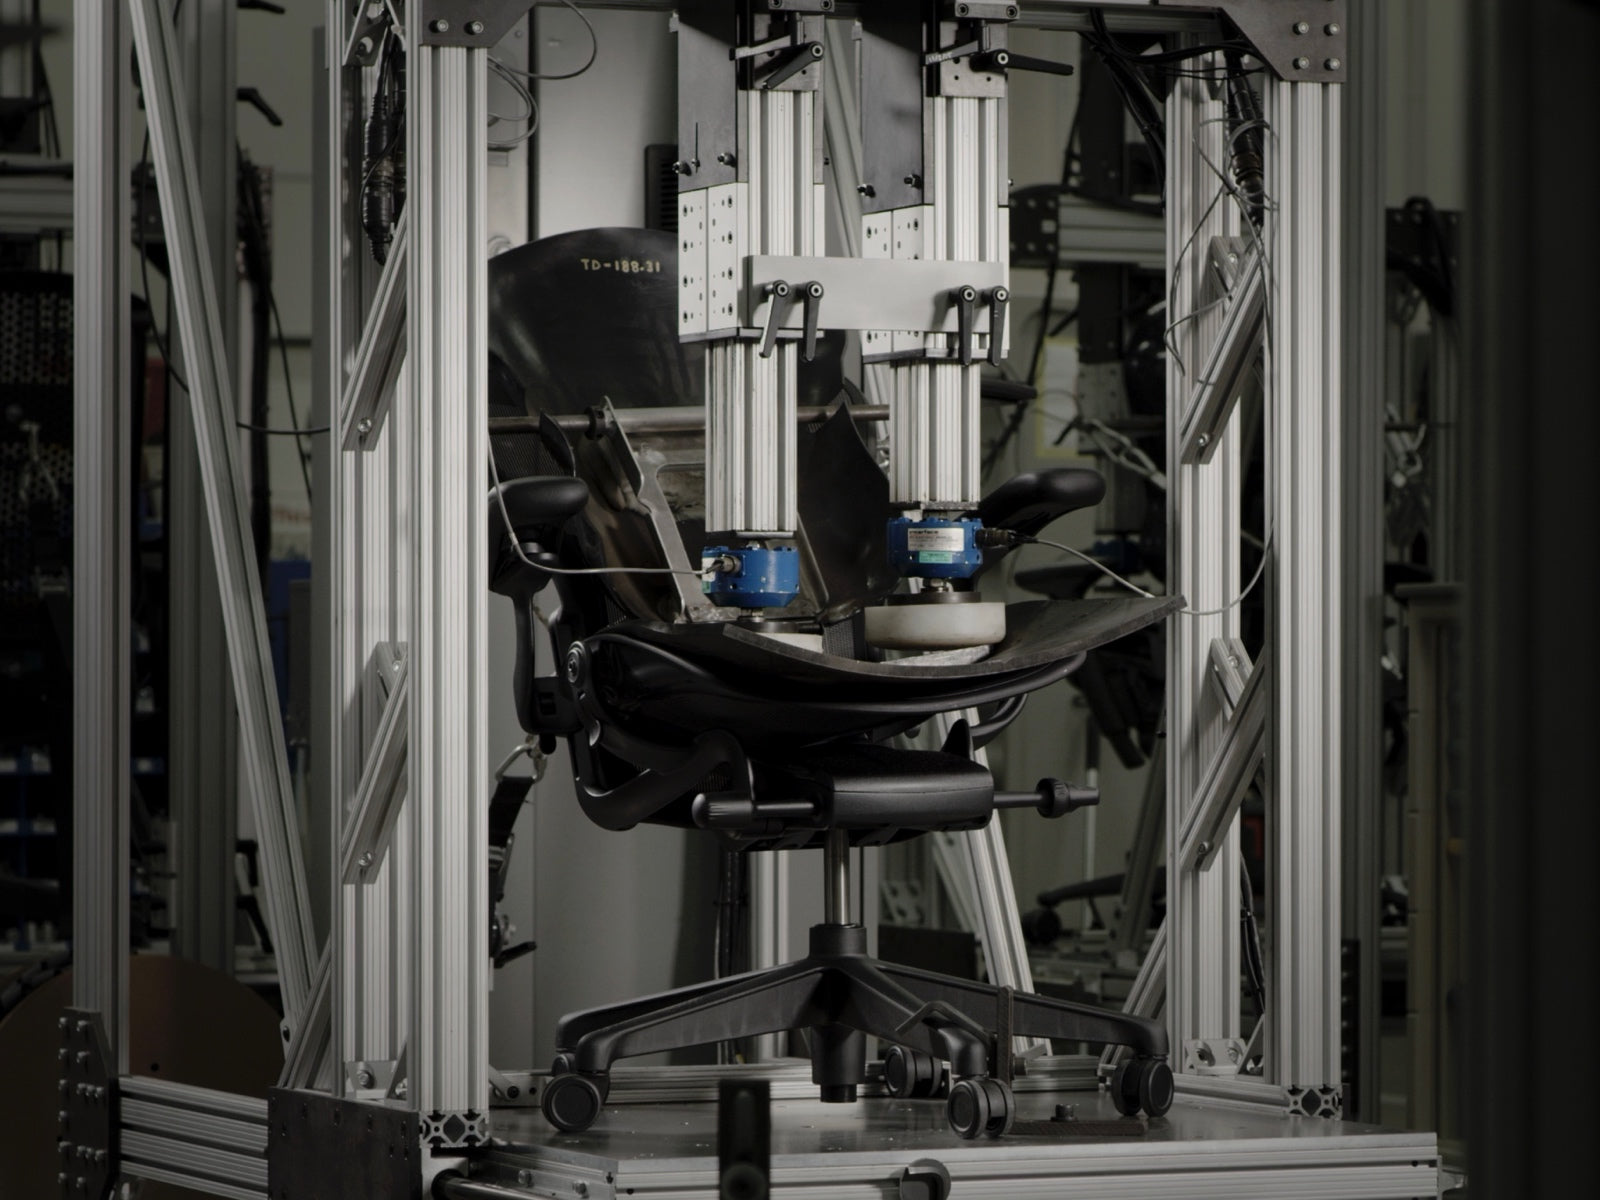 An Aeron Gaming Chair, shown from the side, in a testing machine at the Herman Miller manufacturing site.